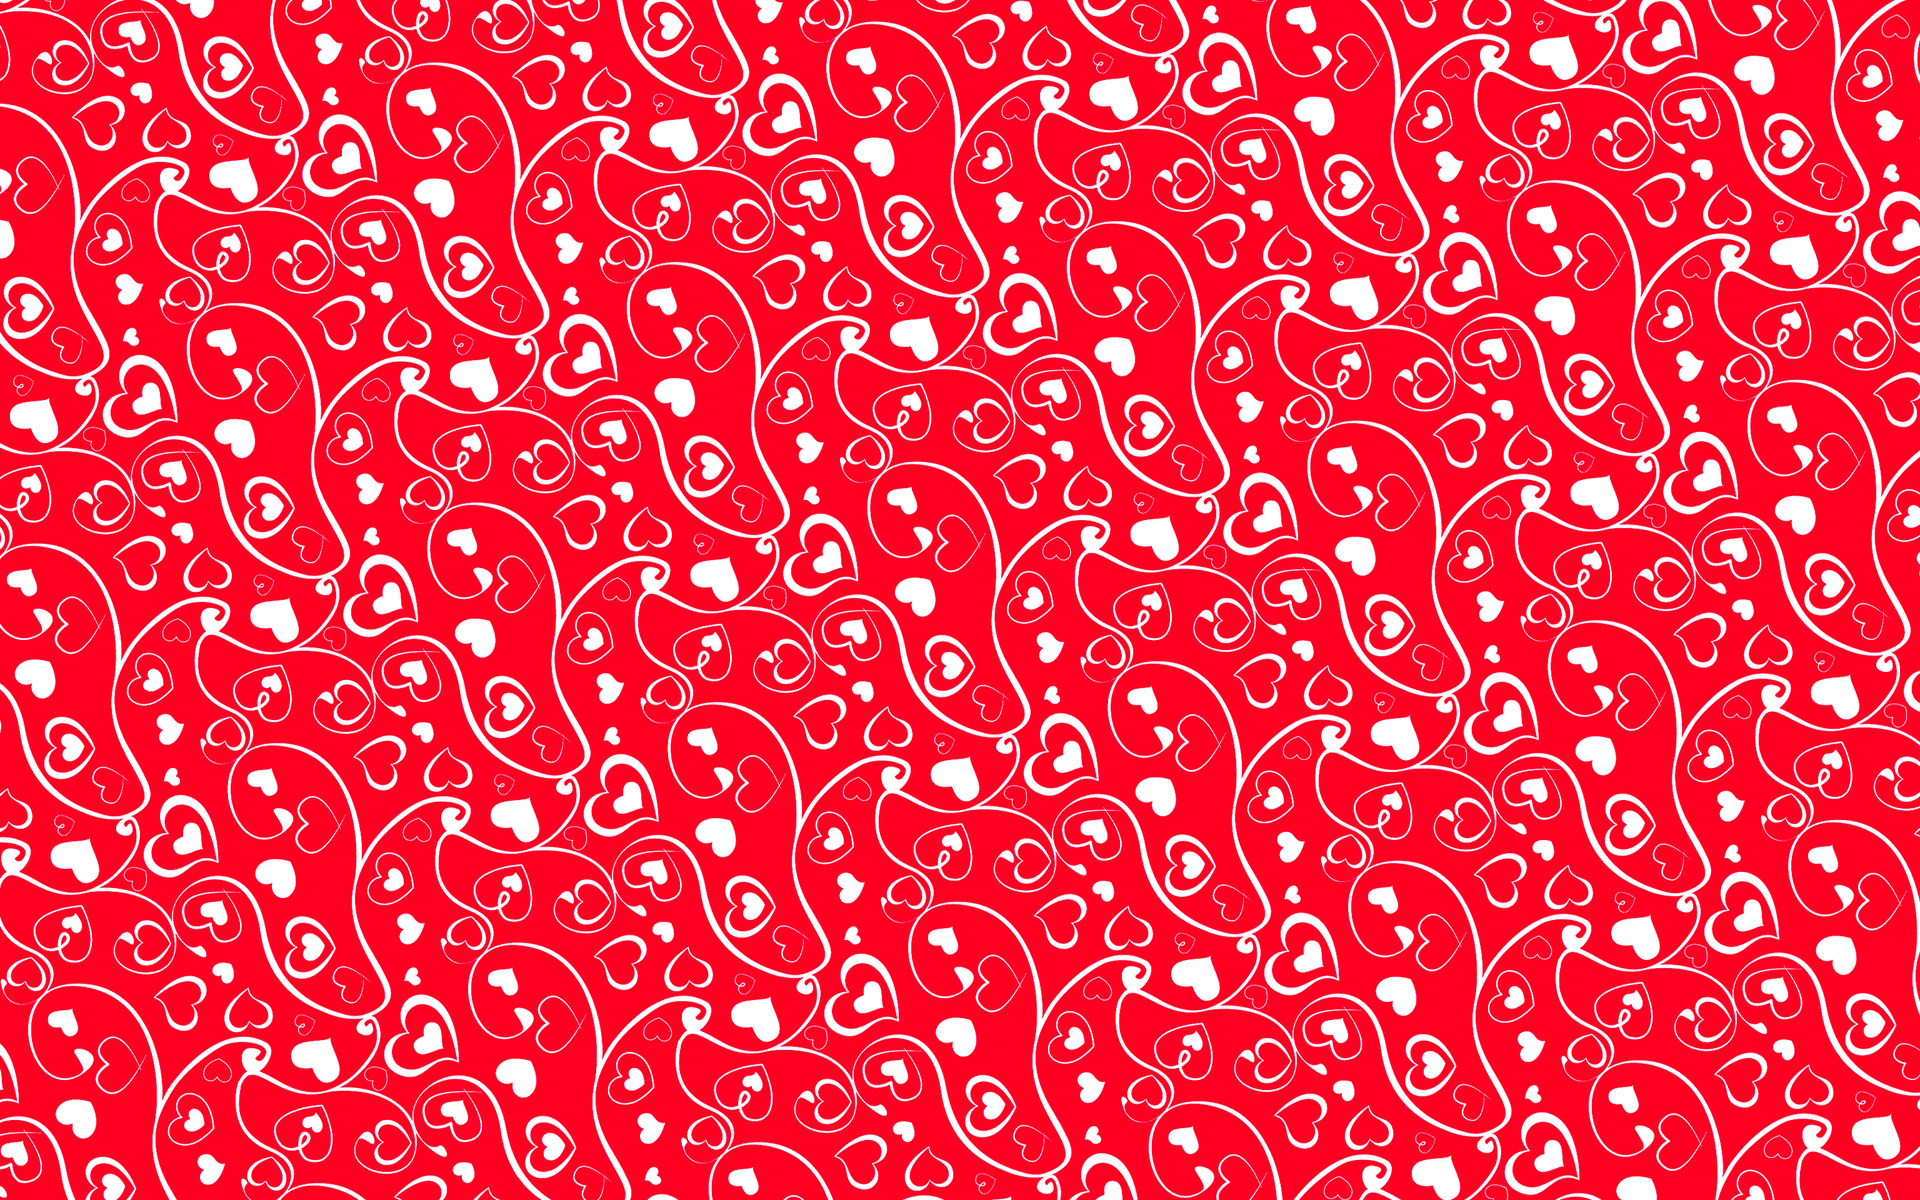 Red Heart and Swirl Patterns Quality